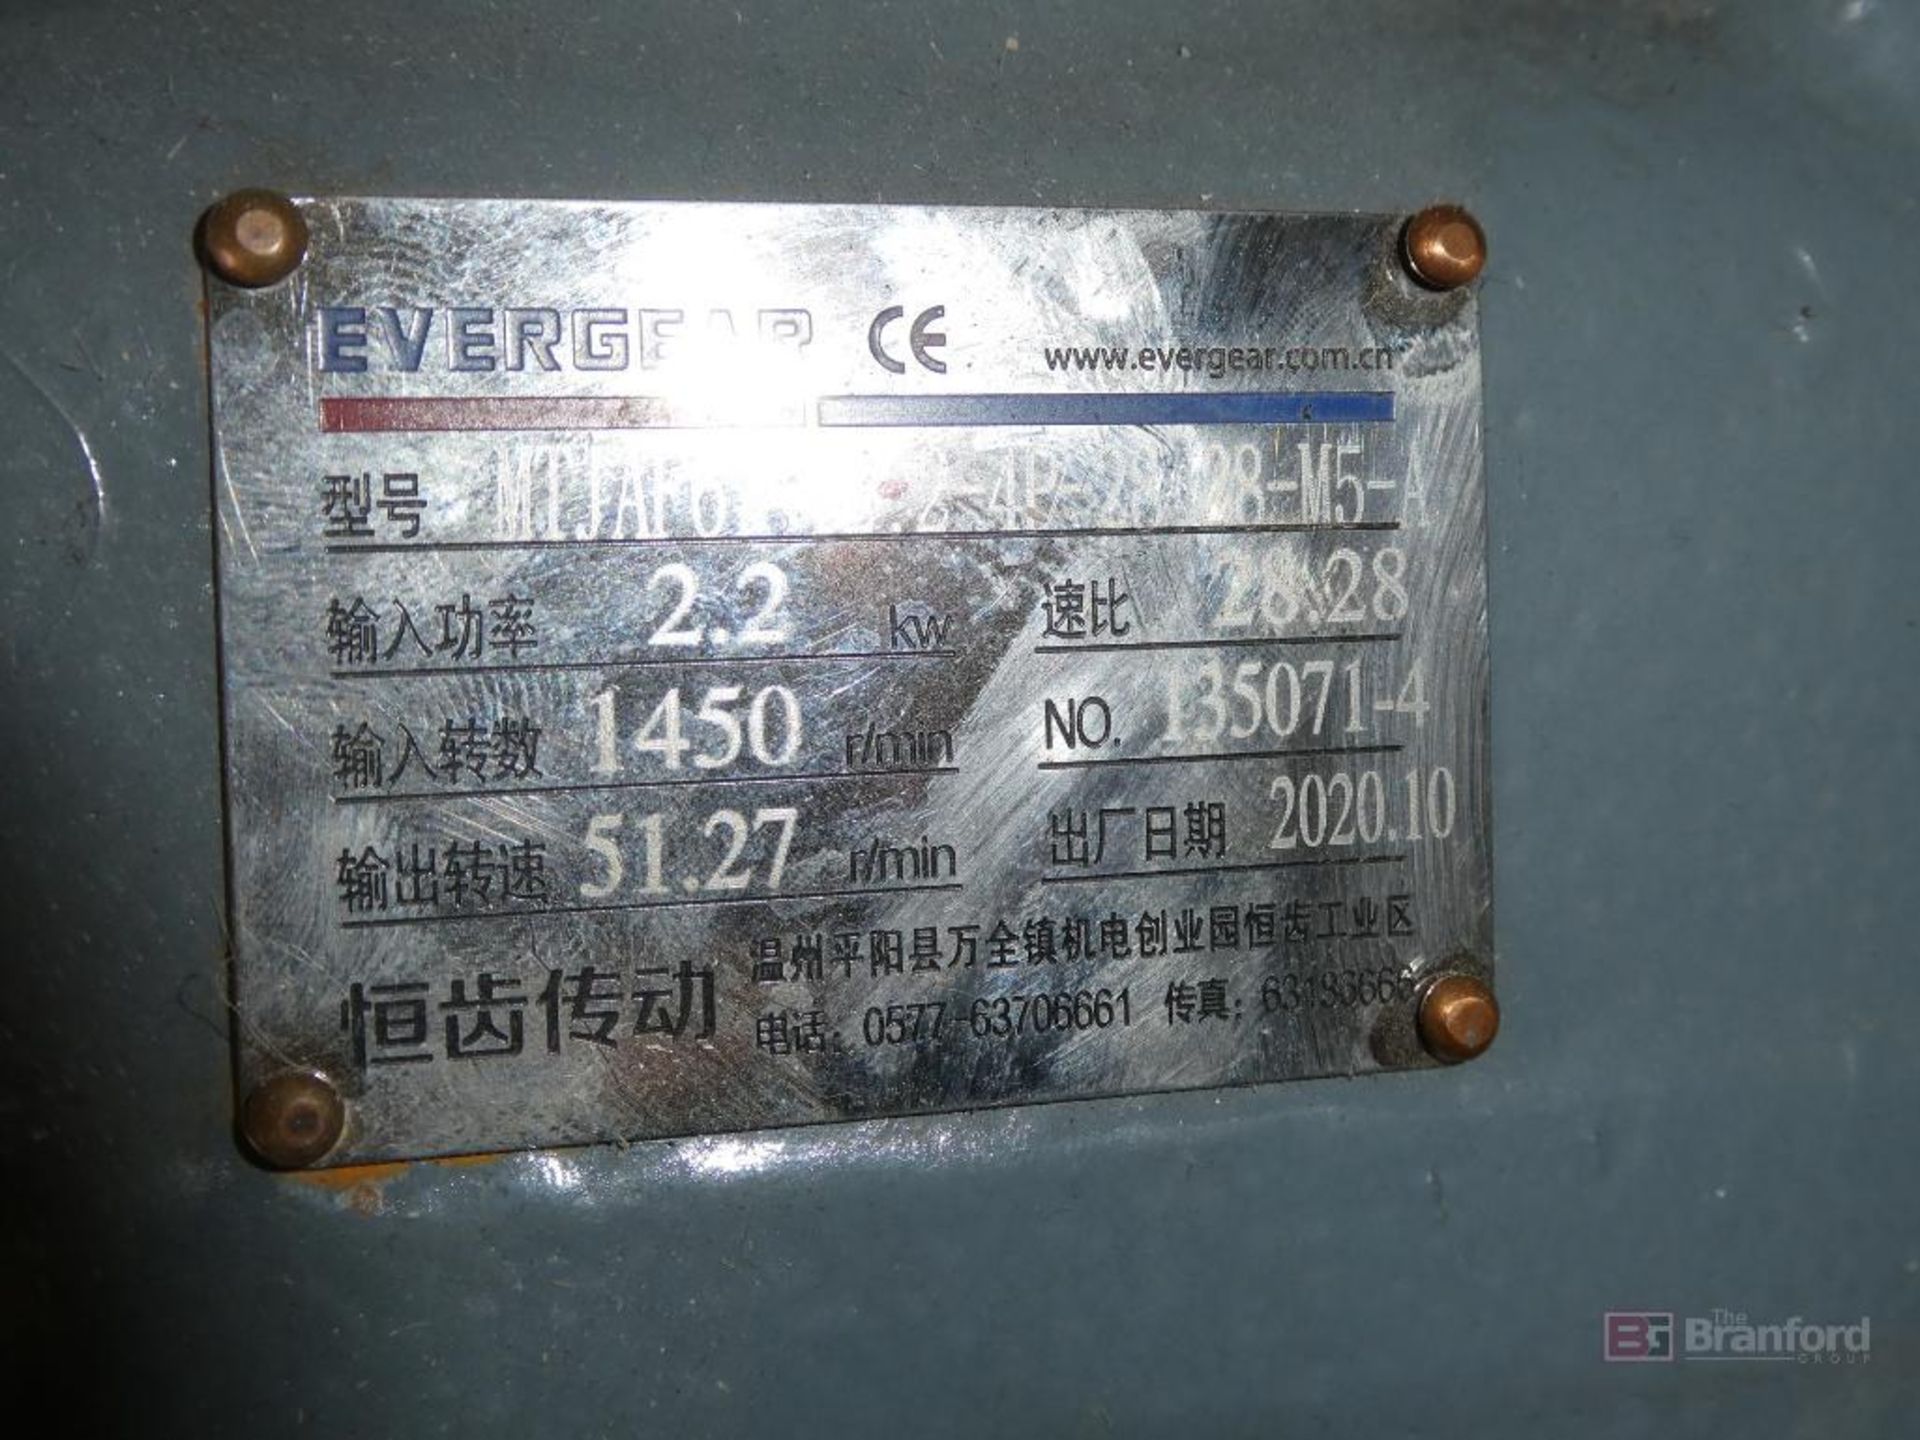 EverGear Model MTJAF67-Y2.2-4P-28-M5A, Gearbox Speed Reducer, Assorted Gear Motors - Image 3 of 10